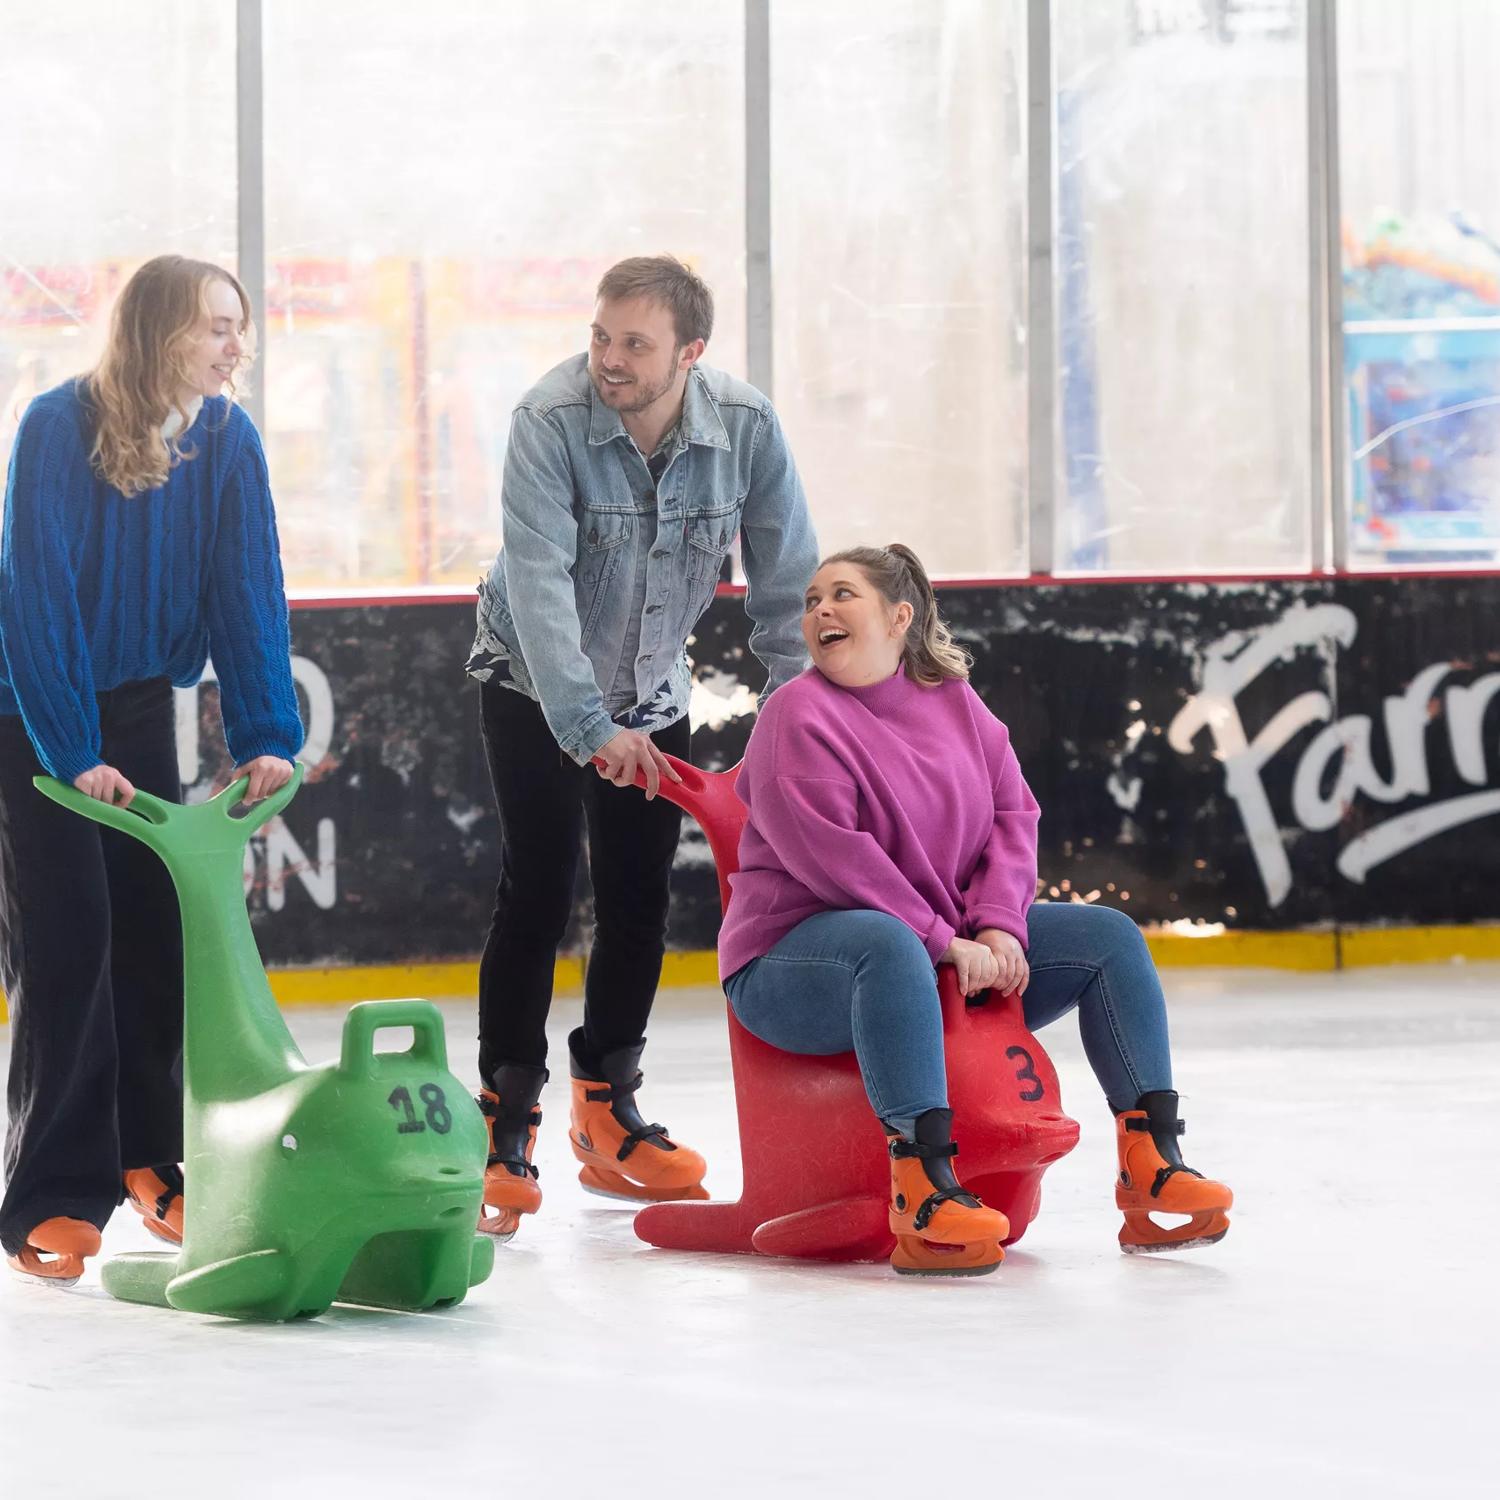 A group of people ice skating at Daytona Adventure Park in Upper Hutt, supporting themselves with two dolphin skate assists.